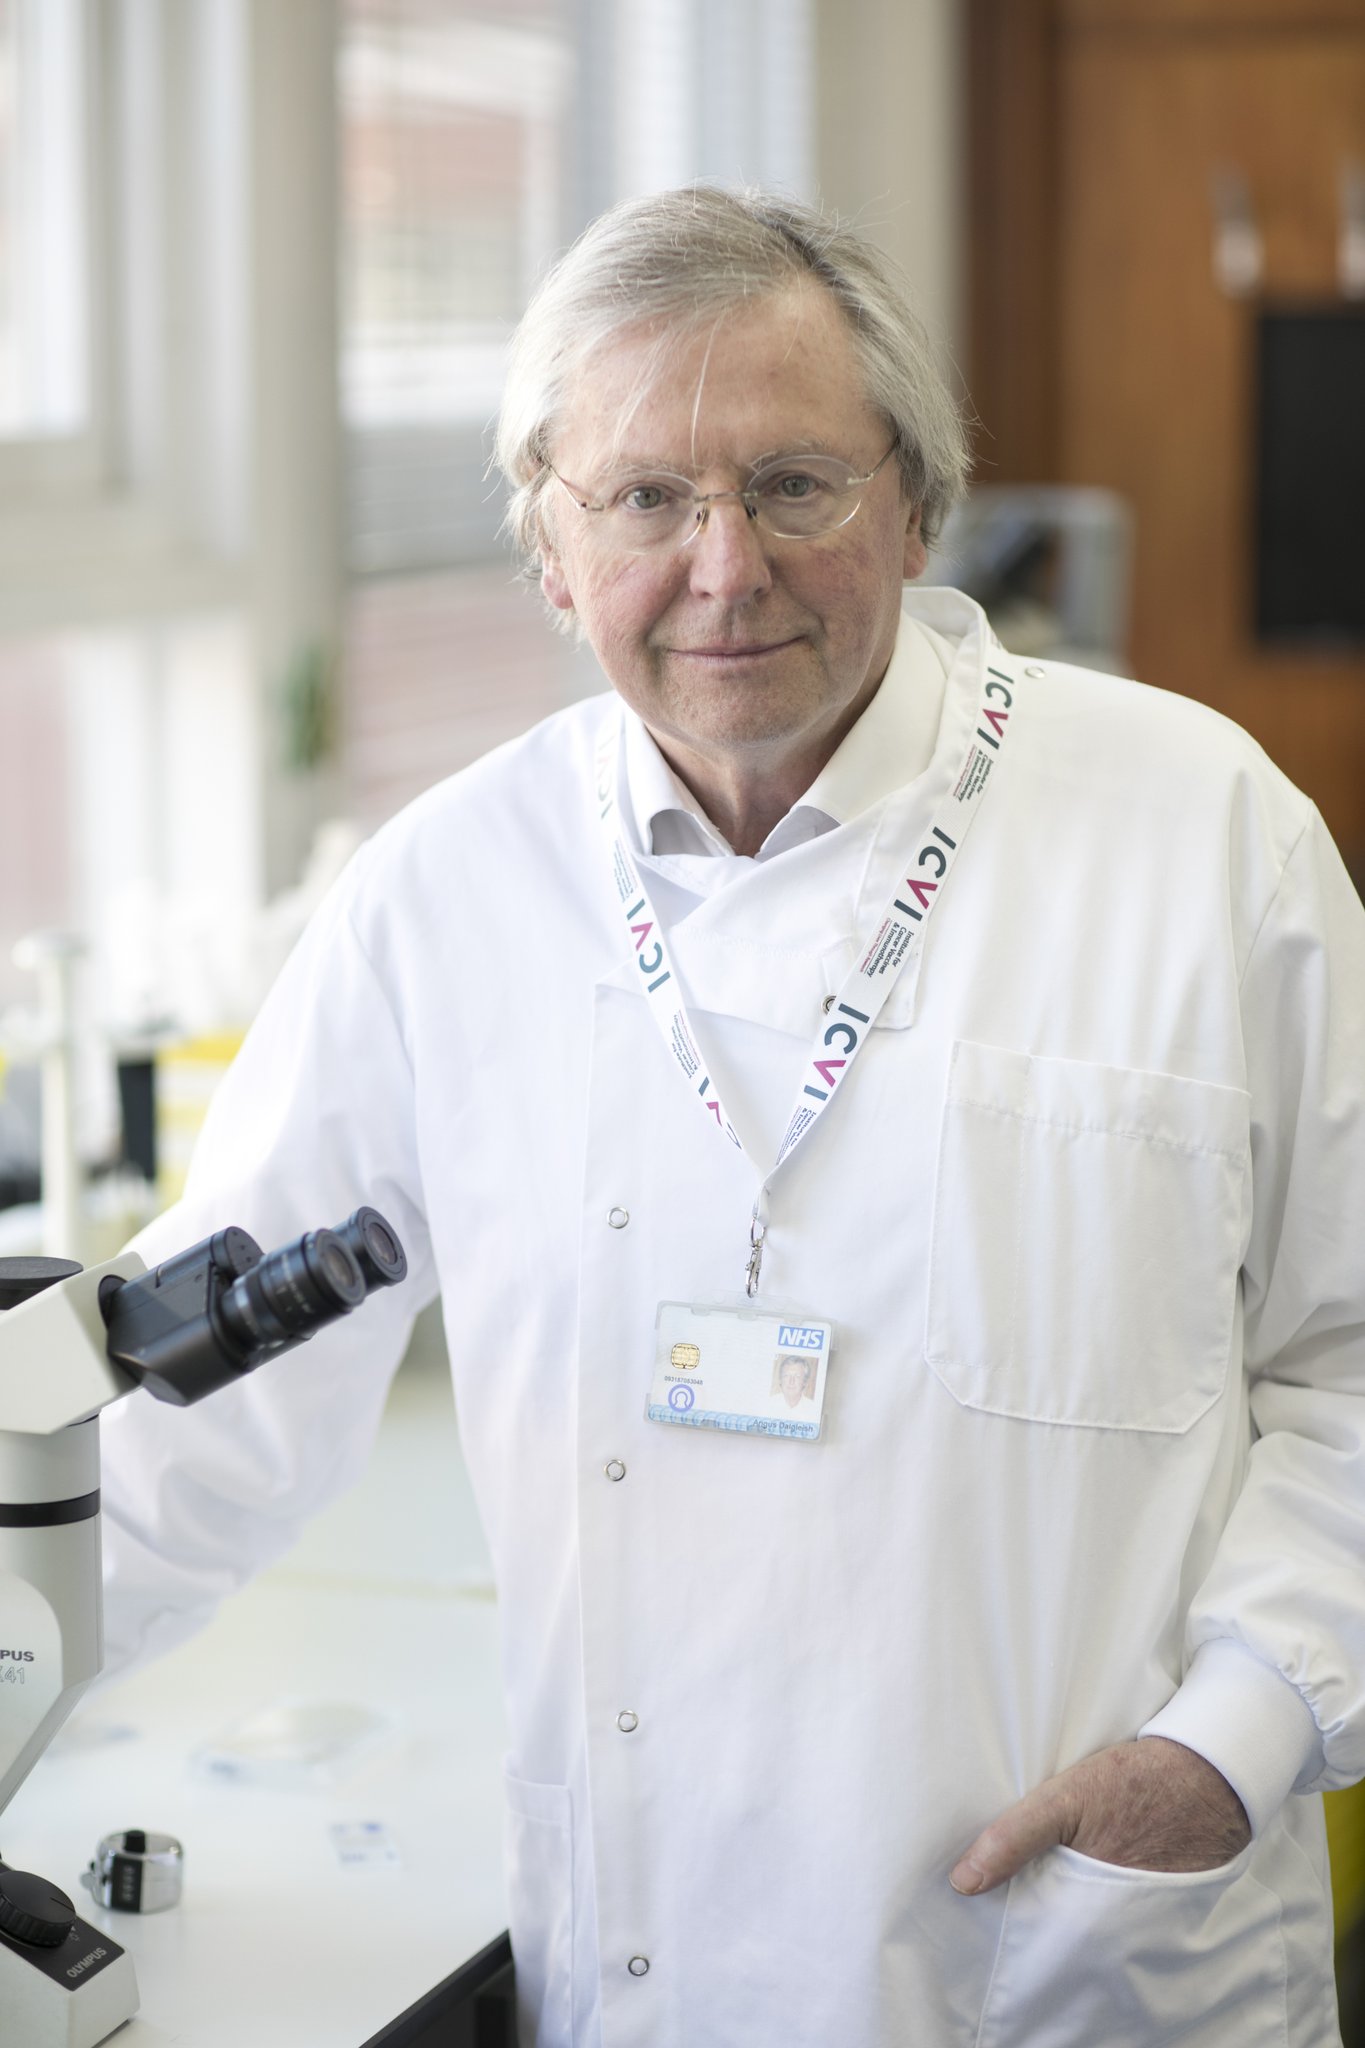 Josh Boswell on X: "Prof. Angus Dalgleish is a professor of oncology at St  George's University, best known for his breakthrough HIV treatments.  Sørensen, a virologist, is chair of pharmaceutical company, Immunor,